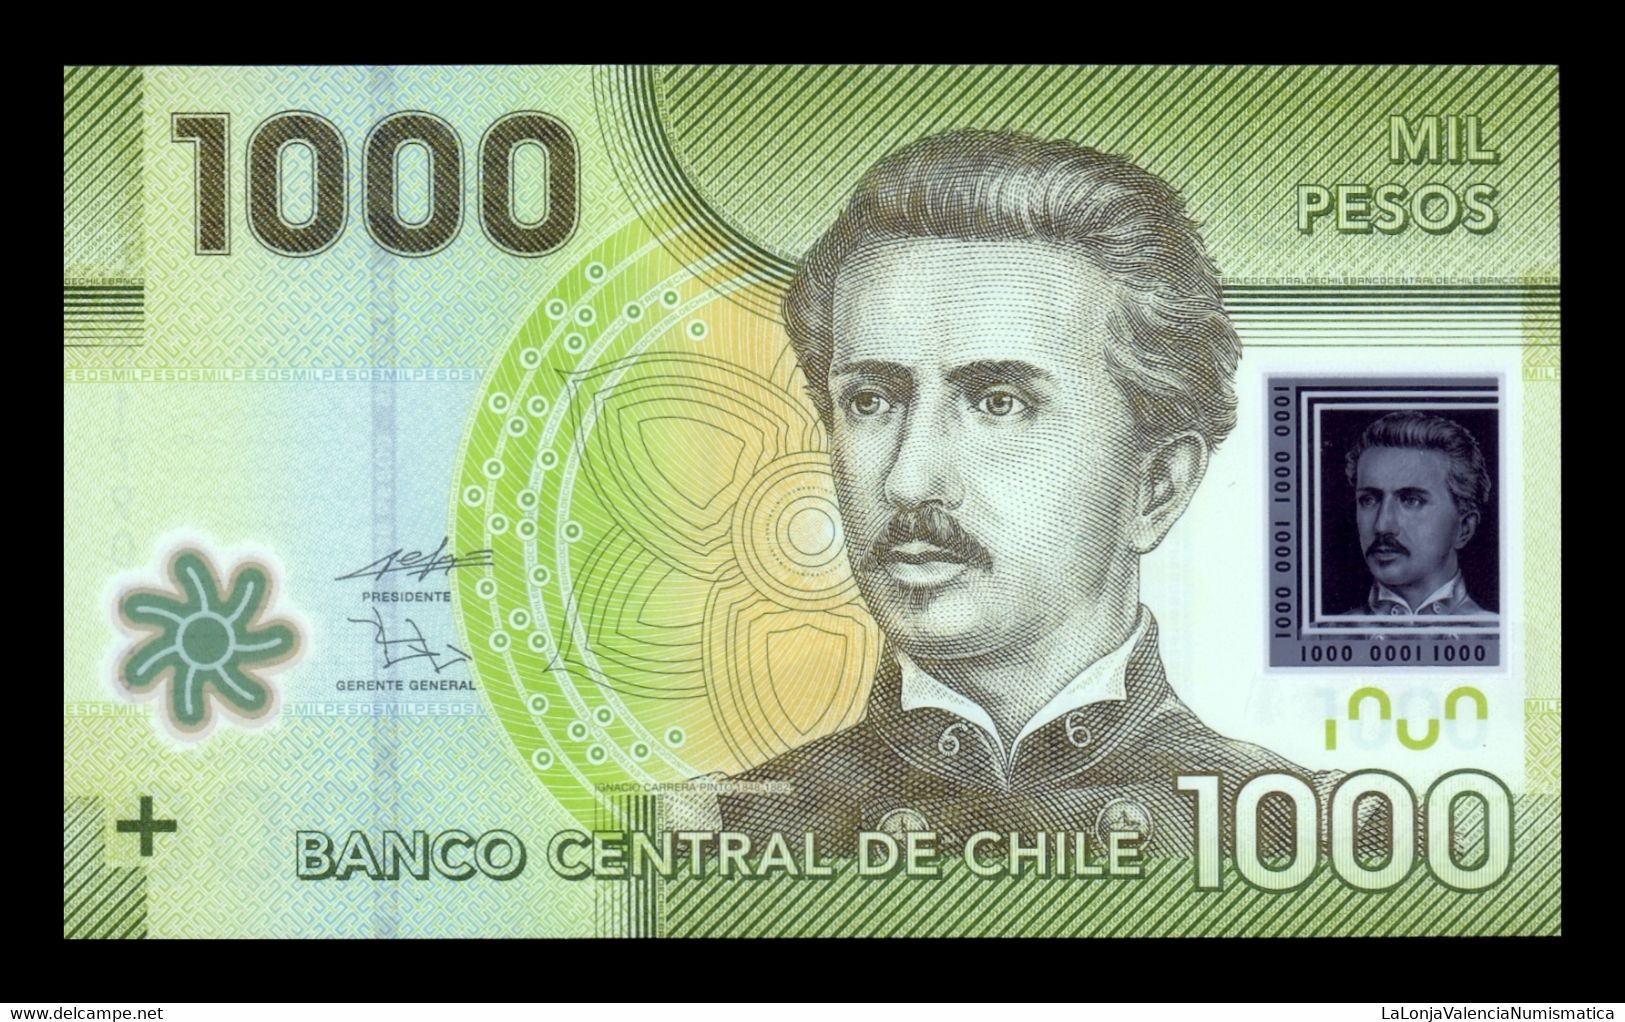 Chile 1000 Pesos 2010 Pick 161a First Date Polymer SC UNC - Chile